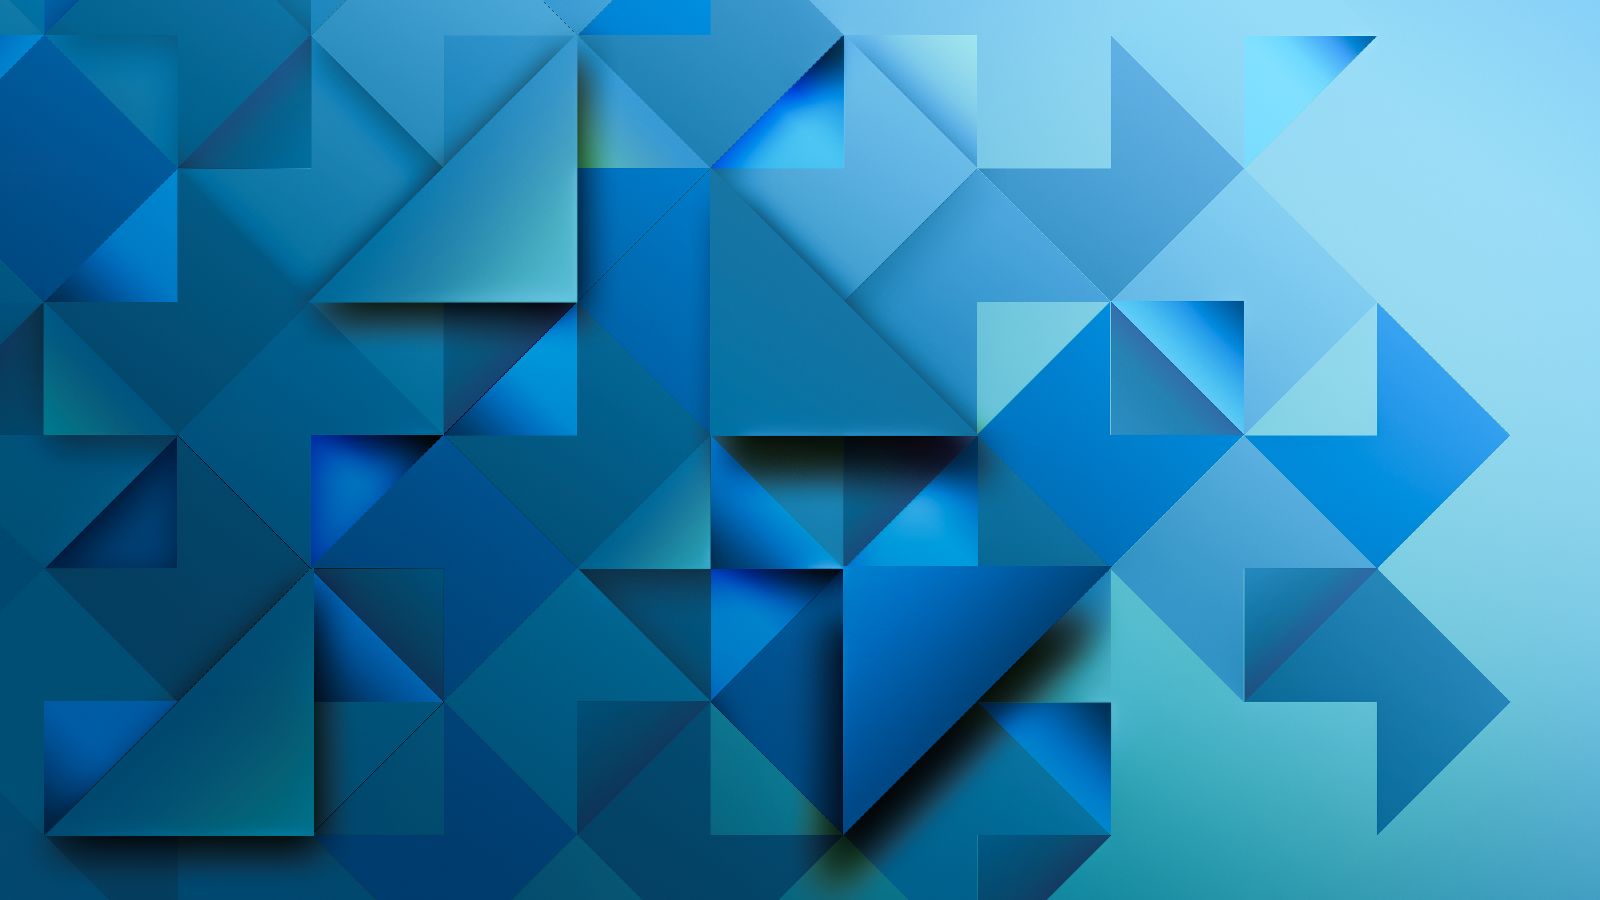 A diagonal, fading grid of boxes and triangles, with varying shades of dark blues and light greens. The shapes are irregularly patterned and placed with shadow effects to create a unique aesthetic.